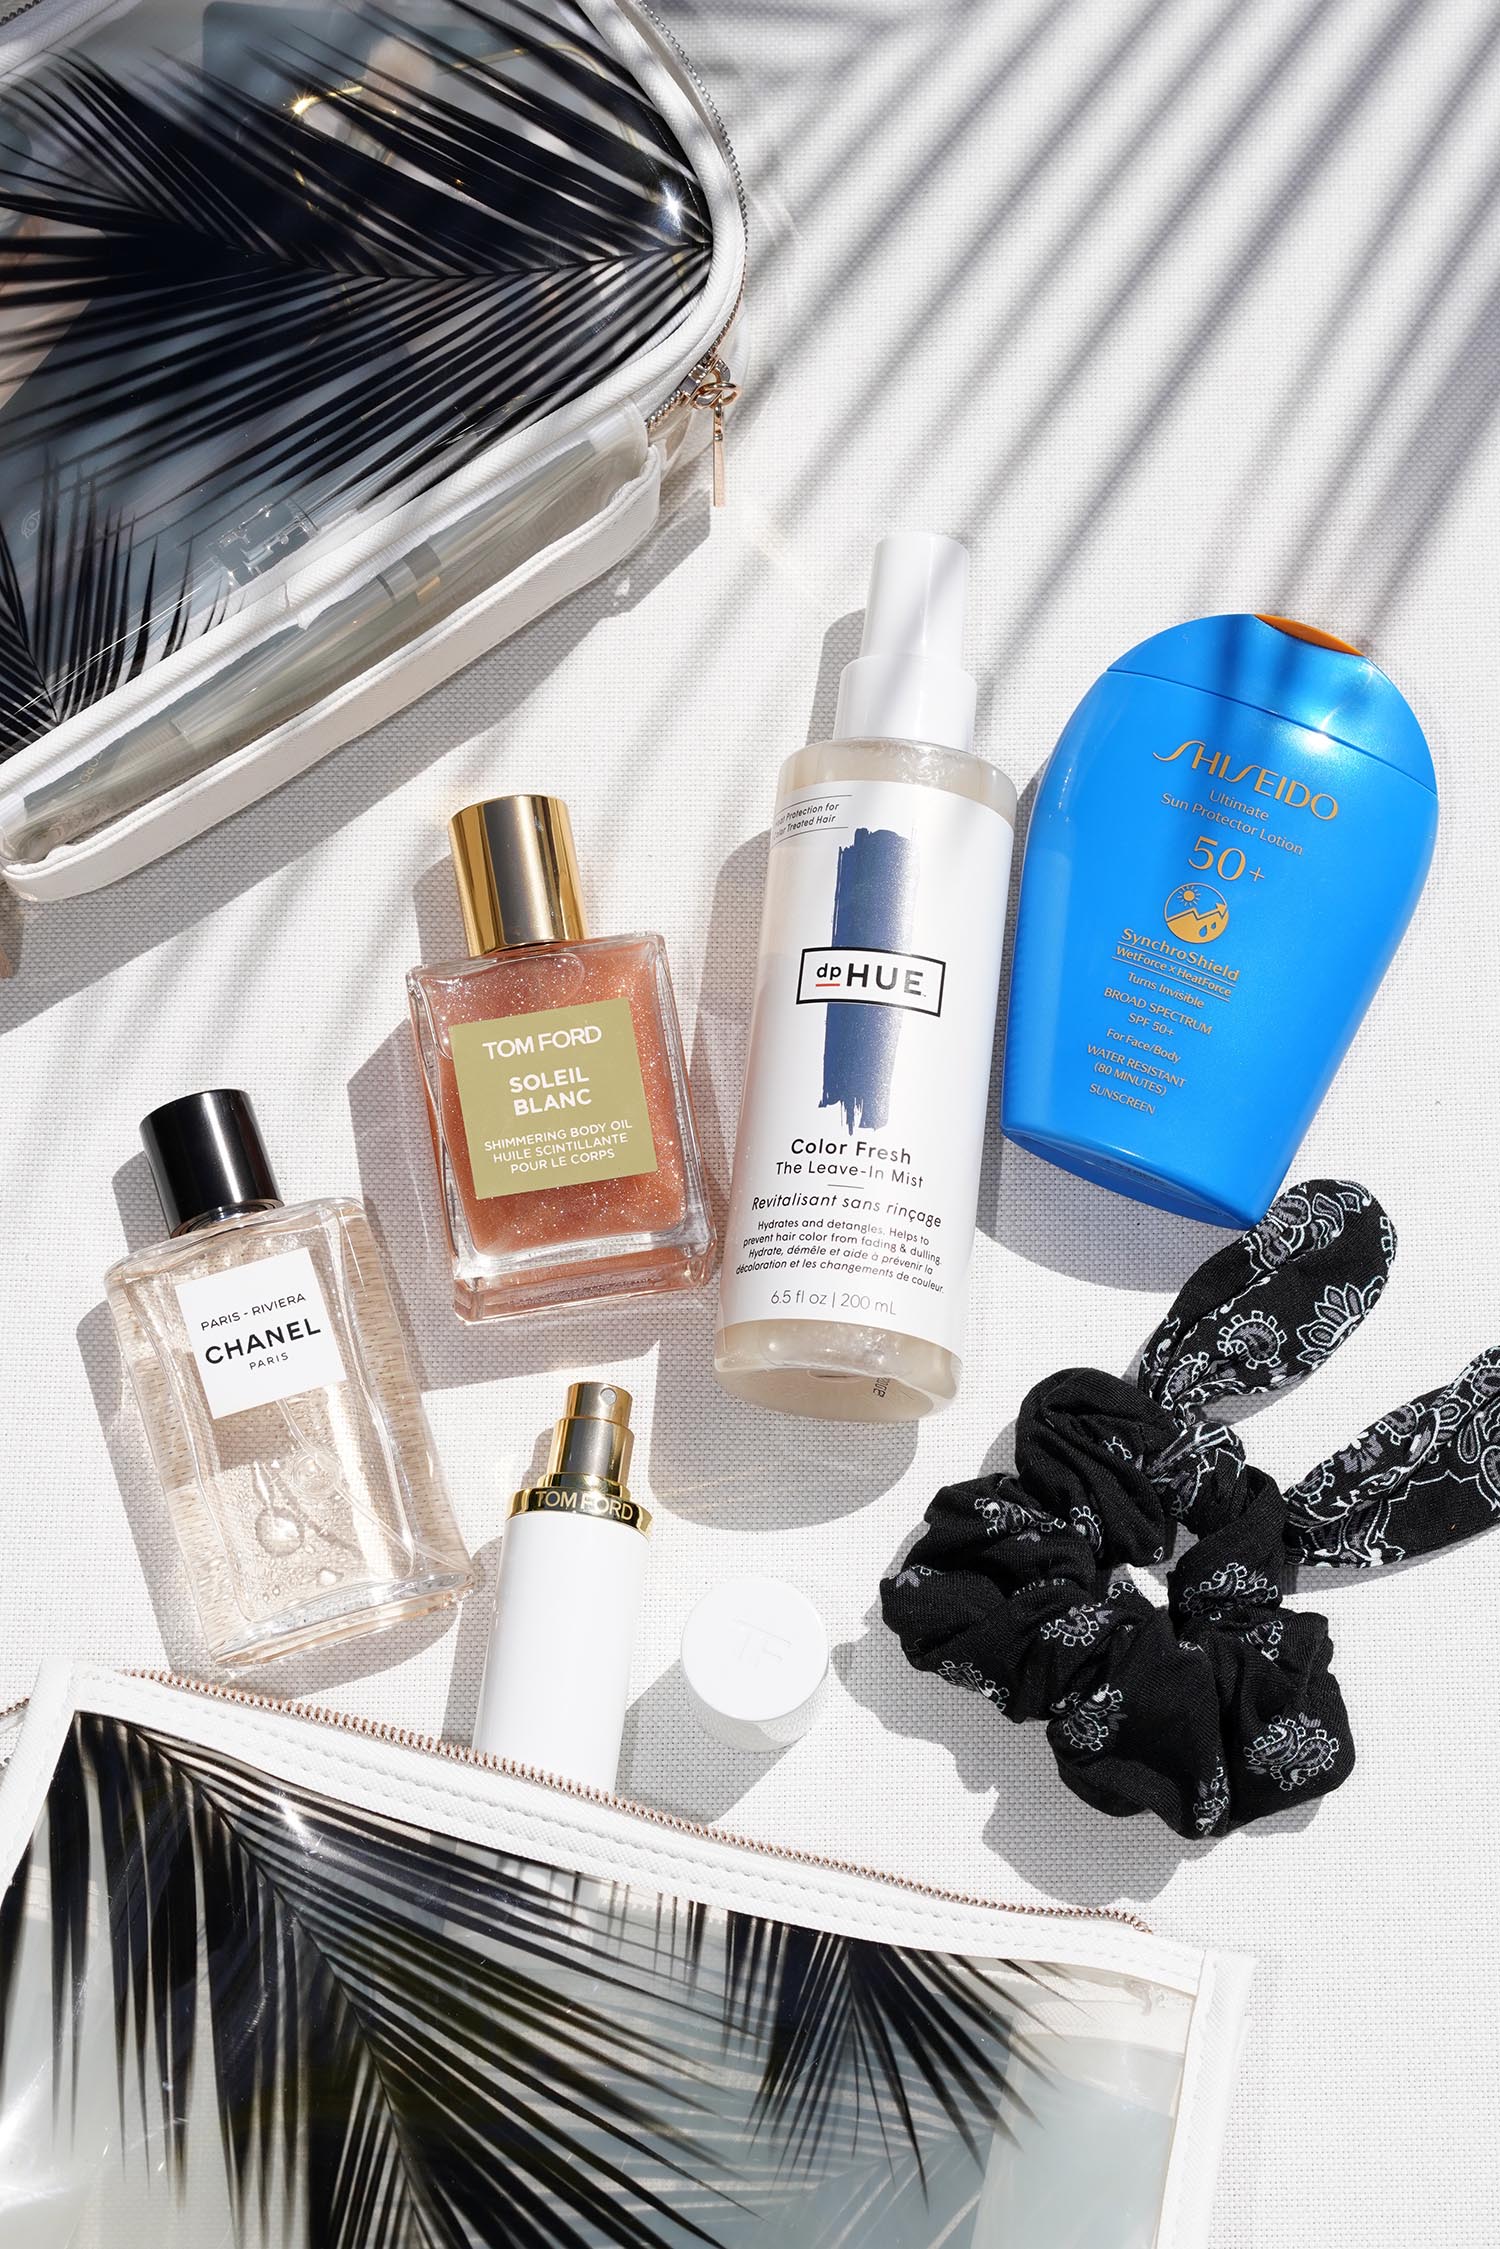 Lancôme Beauty Box featuring 9 Full Size Favorites. A $440 value! - Macy's